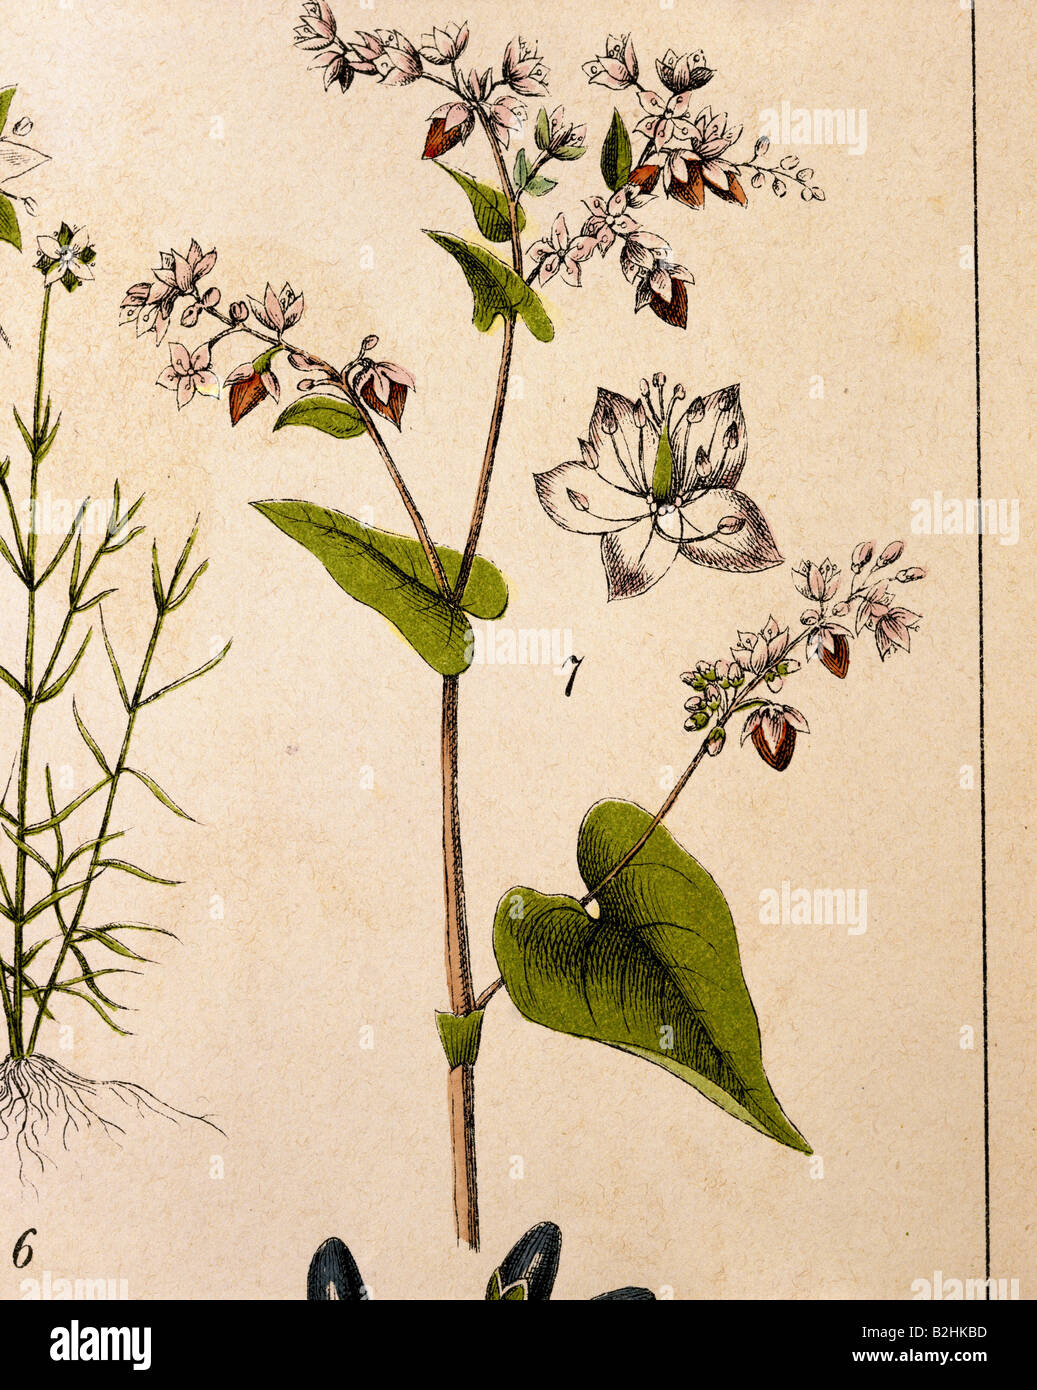 botany, herbs, buckwheat (Fagopyrum), common buckwheat (Fagopyrum esculentum), lithograph, coloured, from "Naturgeschichte des Pflanzenreichs in Bildern" (Natural history of the kingdom of plants in pictures), Esslingen, Germany, 1869, private collection, Stock Photo